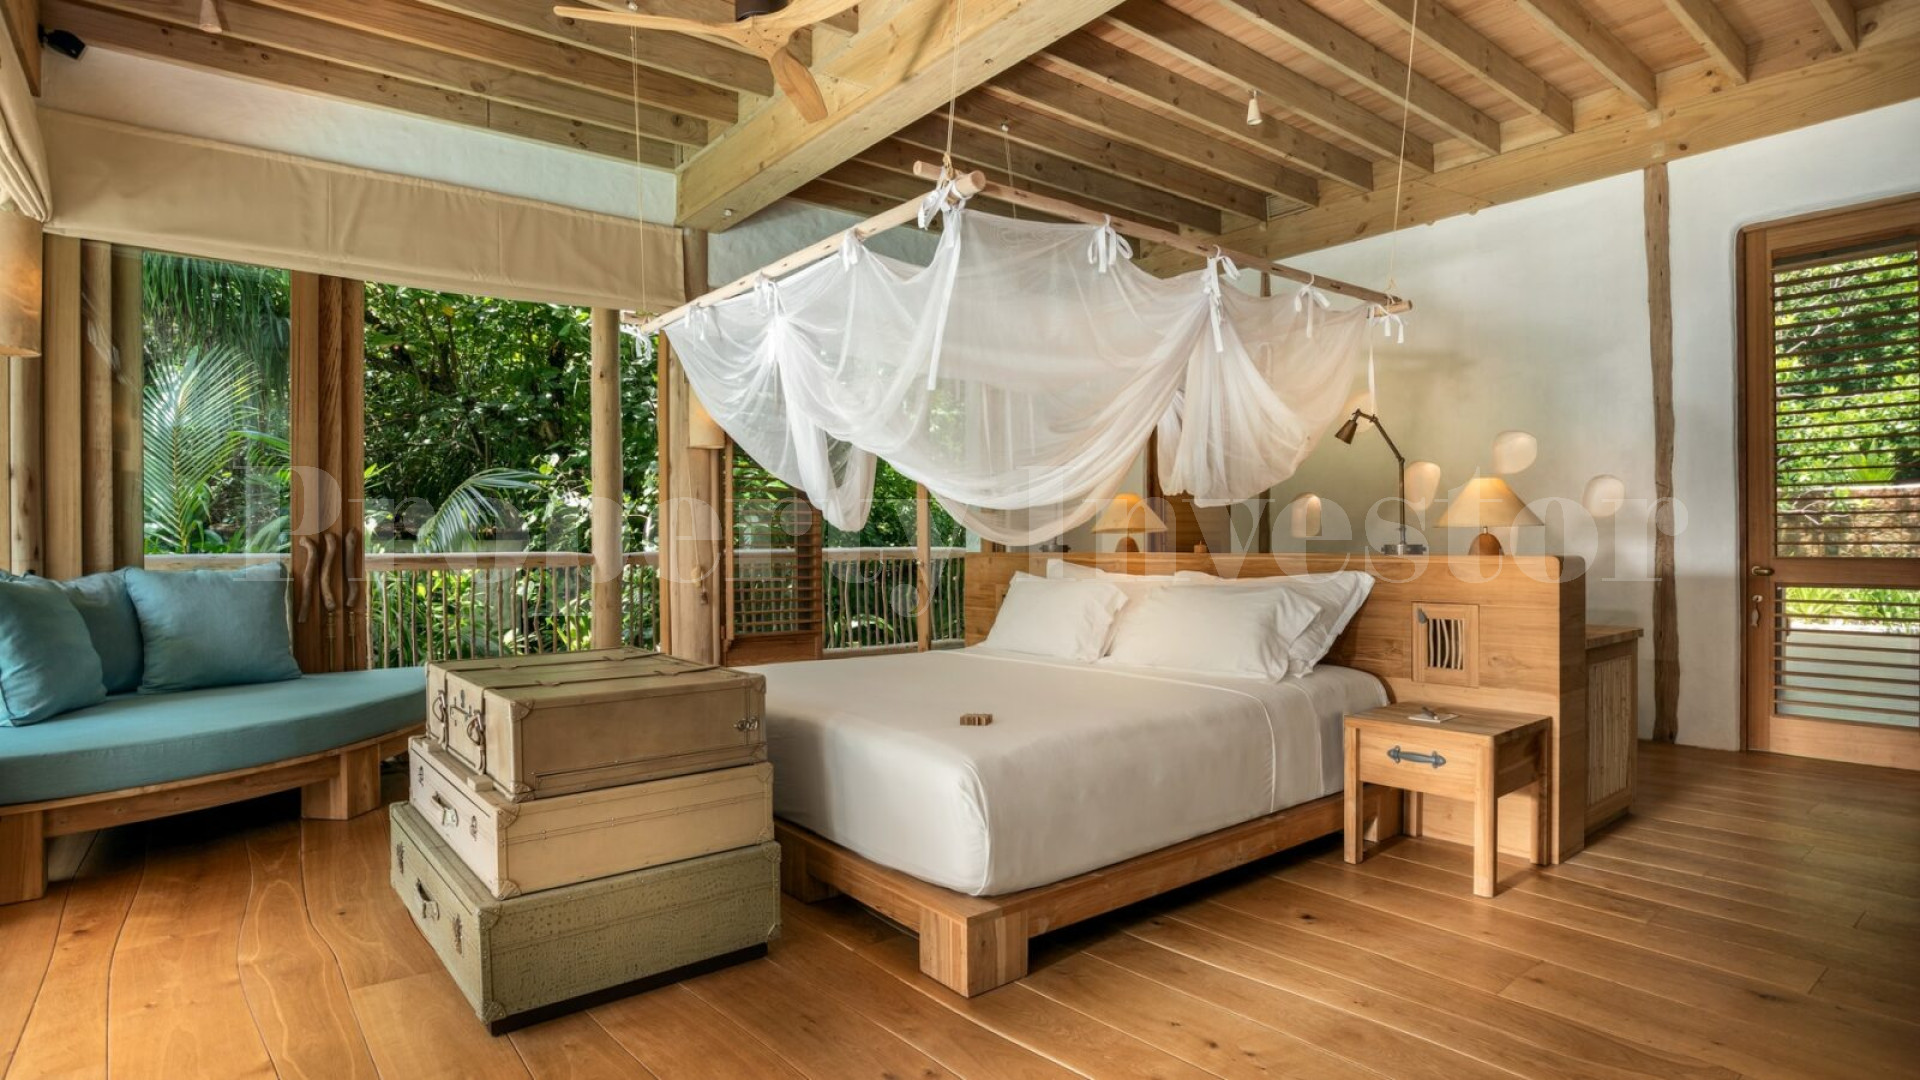 One-of-One 5 Bedroom Luxury Eco Resort Sunrise Villa with Viewing Moonlight Tower for Private Ownership in the Maldives